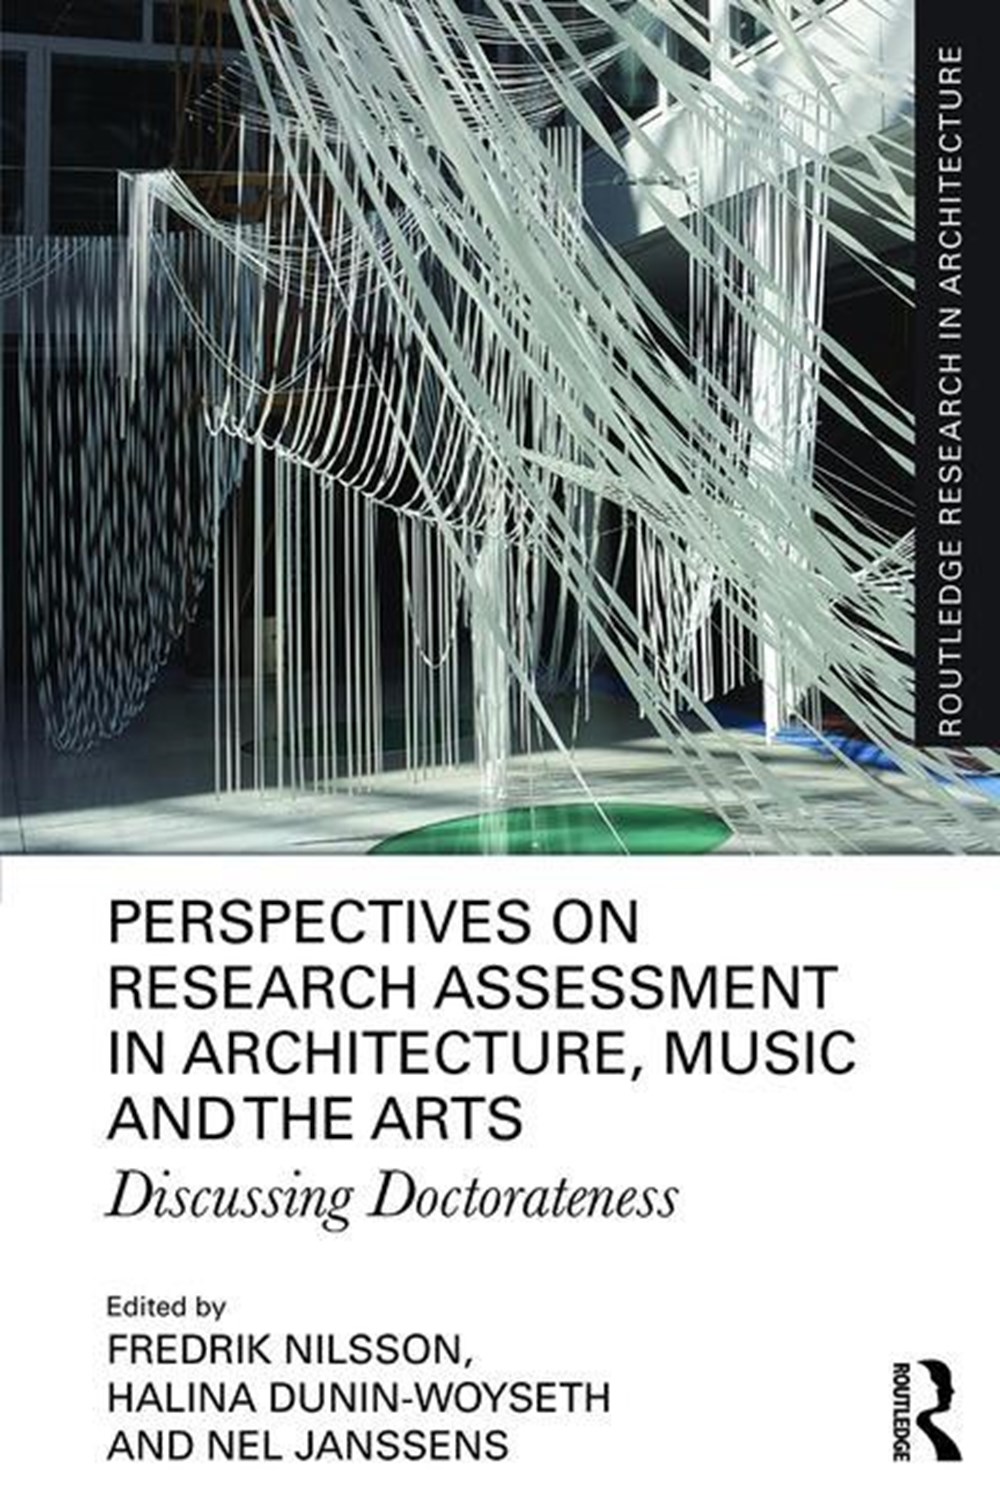 Perspectives on Research Assessment in Architecture, Music and the Arts: Discussing Doctorateness